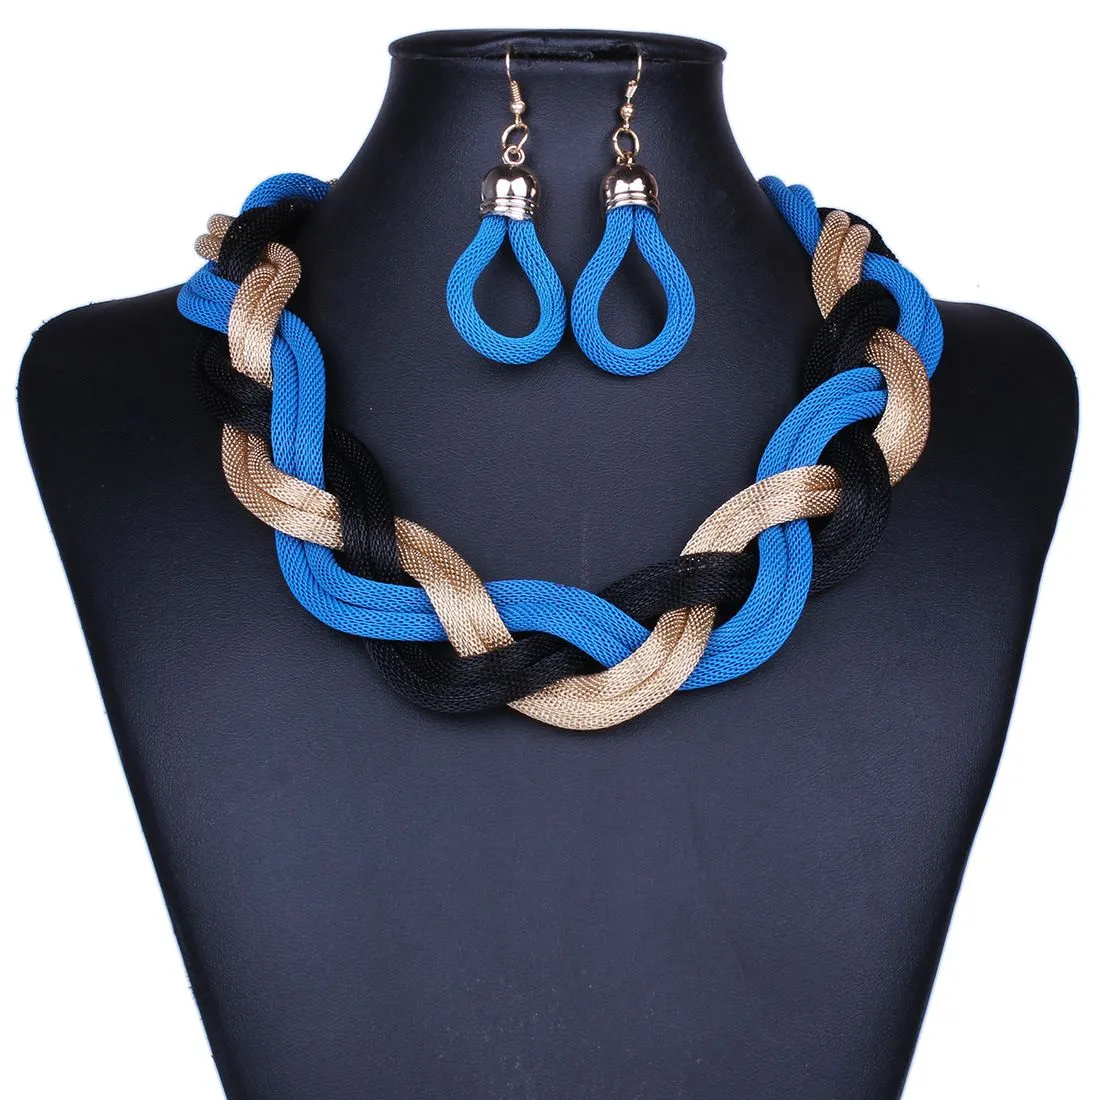 Fashion Exaggerated Crude Preparation of Metal Chain Necklace retro big earrings sets of chain